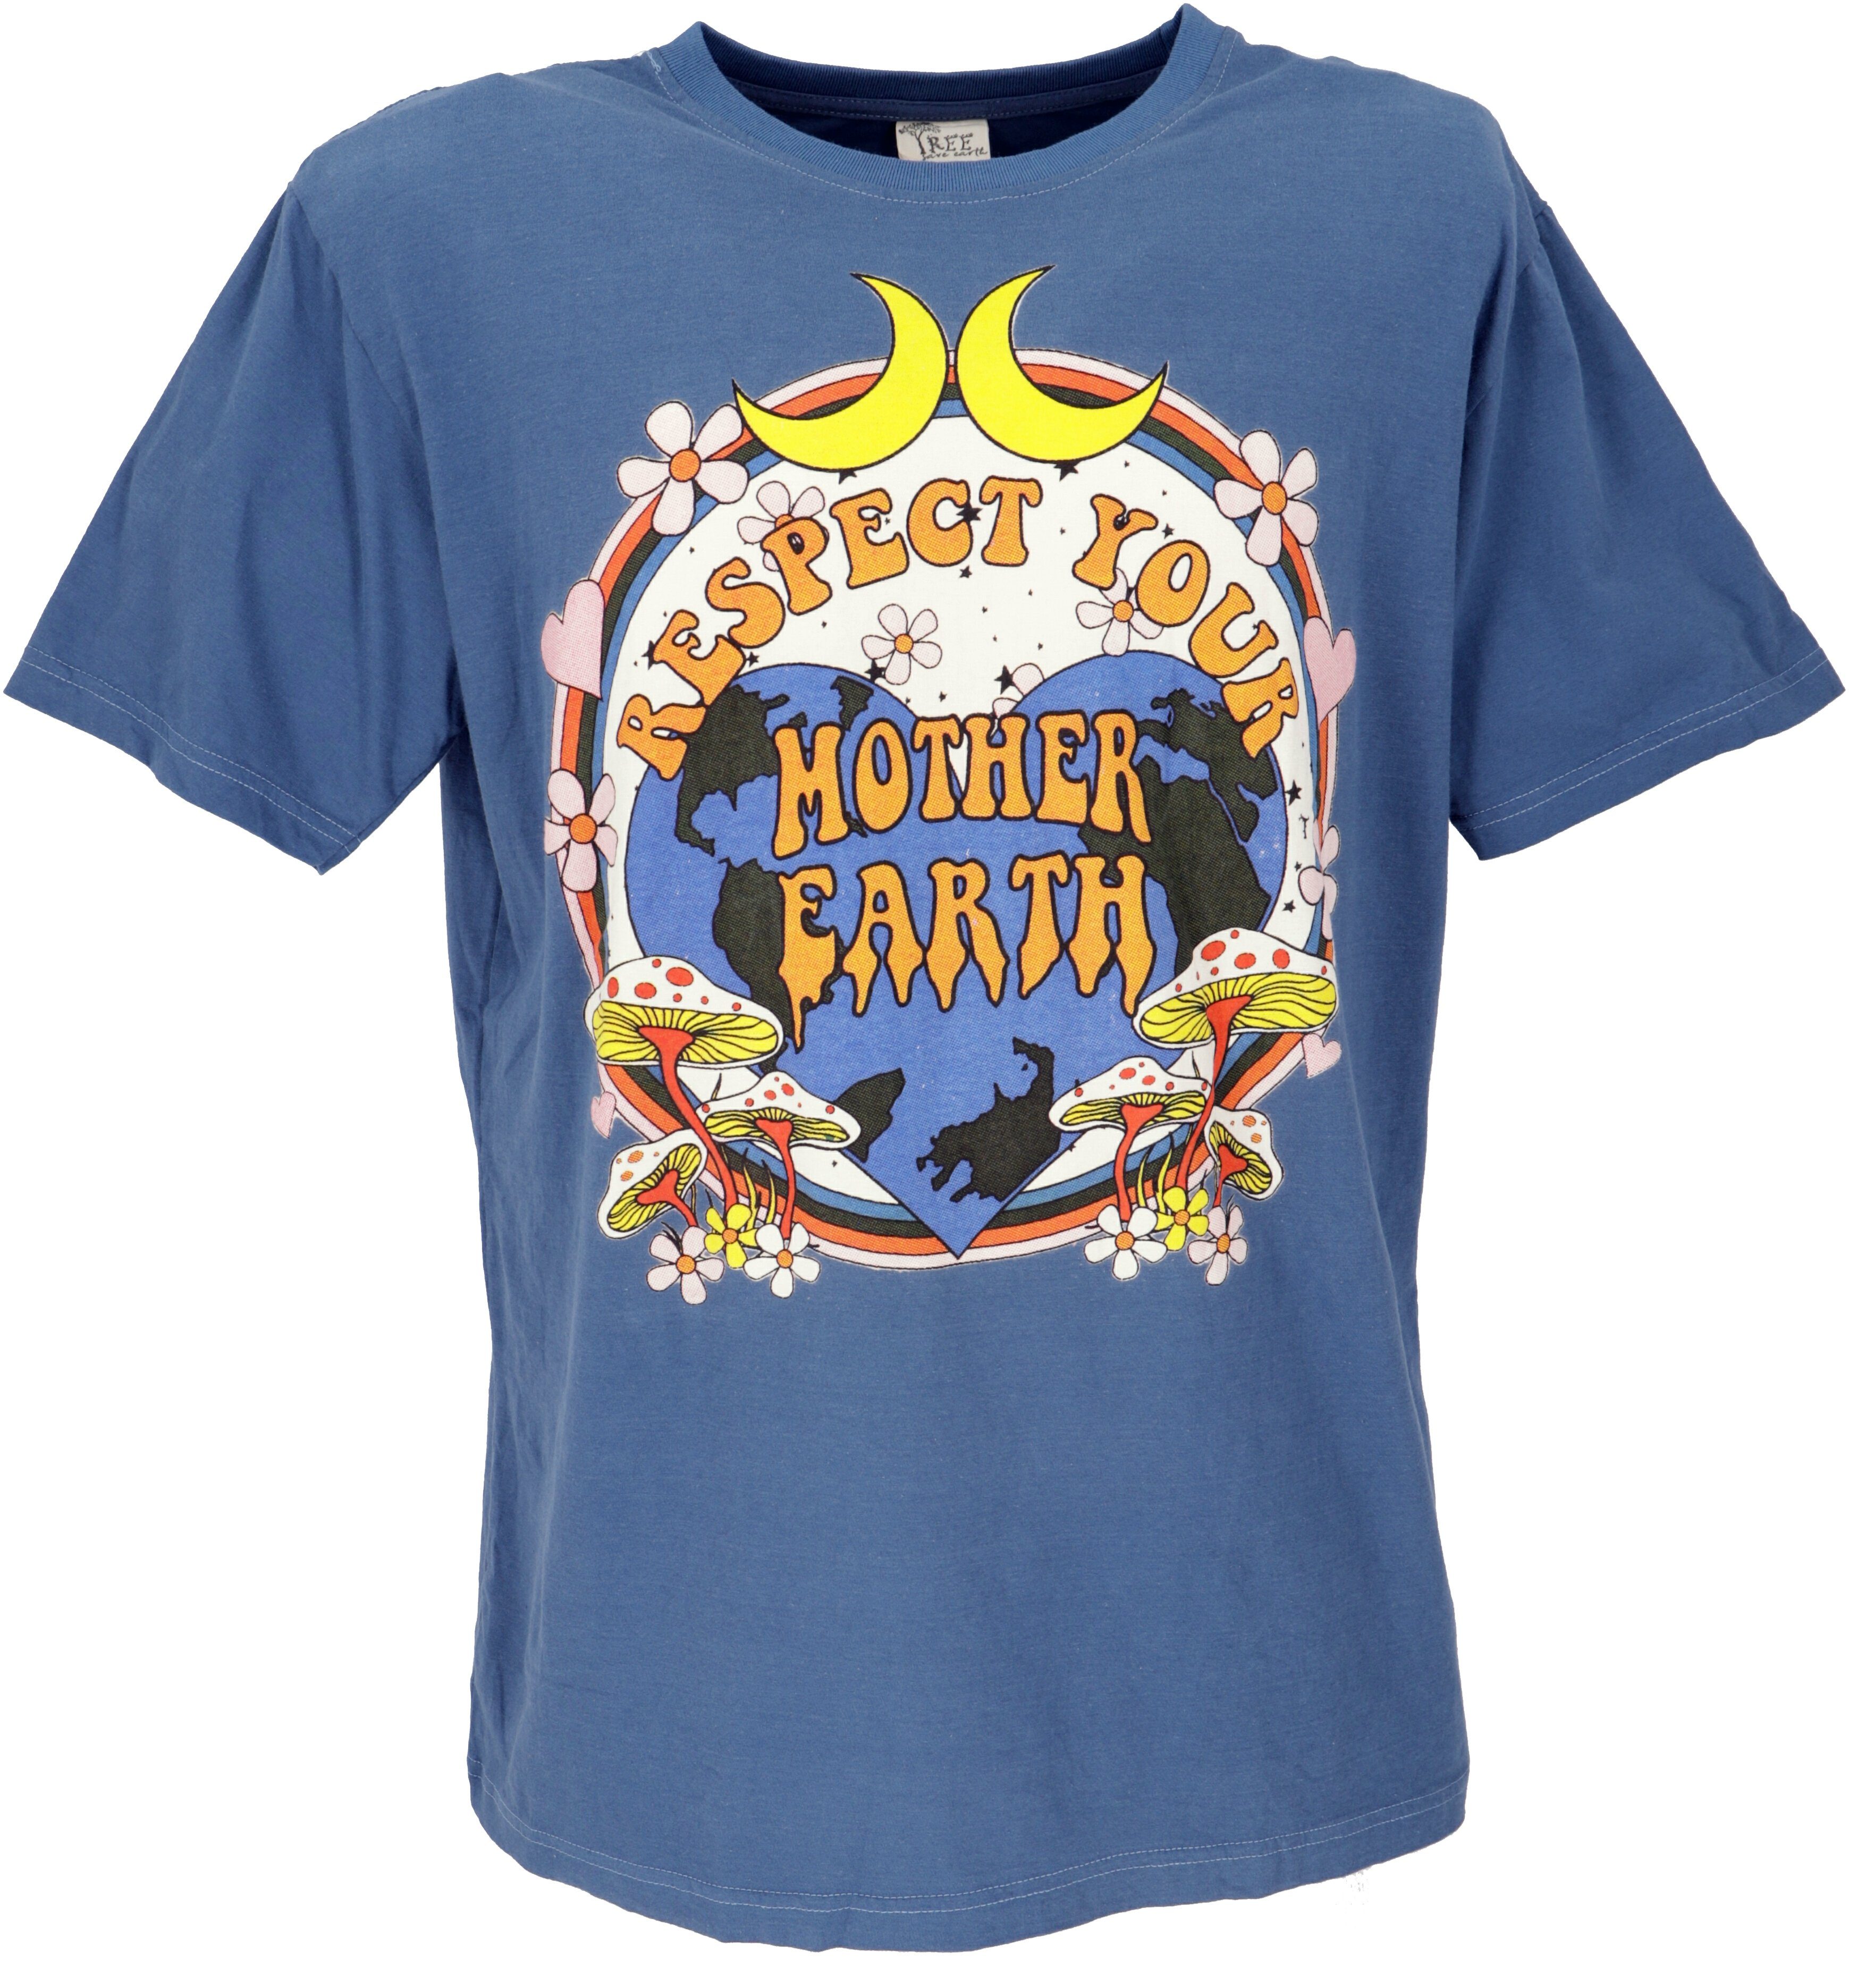 T-Shirt Retro Mother.. earth save Tree T-Shirt T-Shirt, Guru-Shop - earth/blau Retro Mother